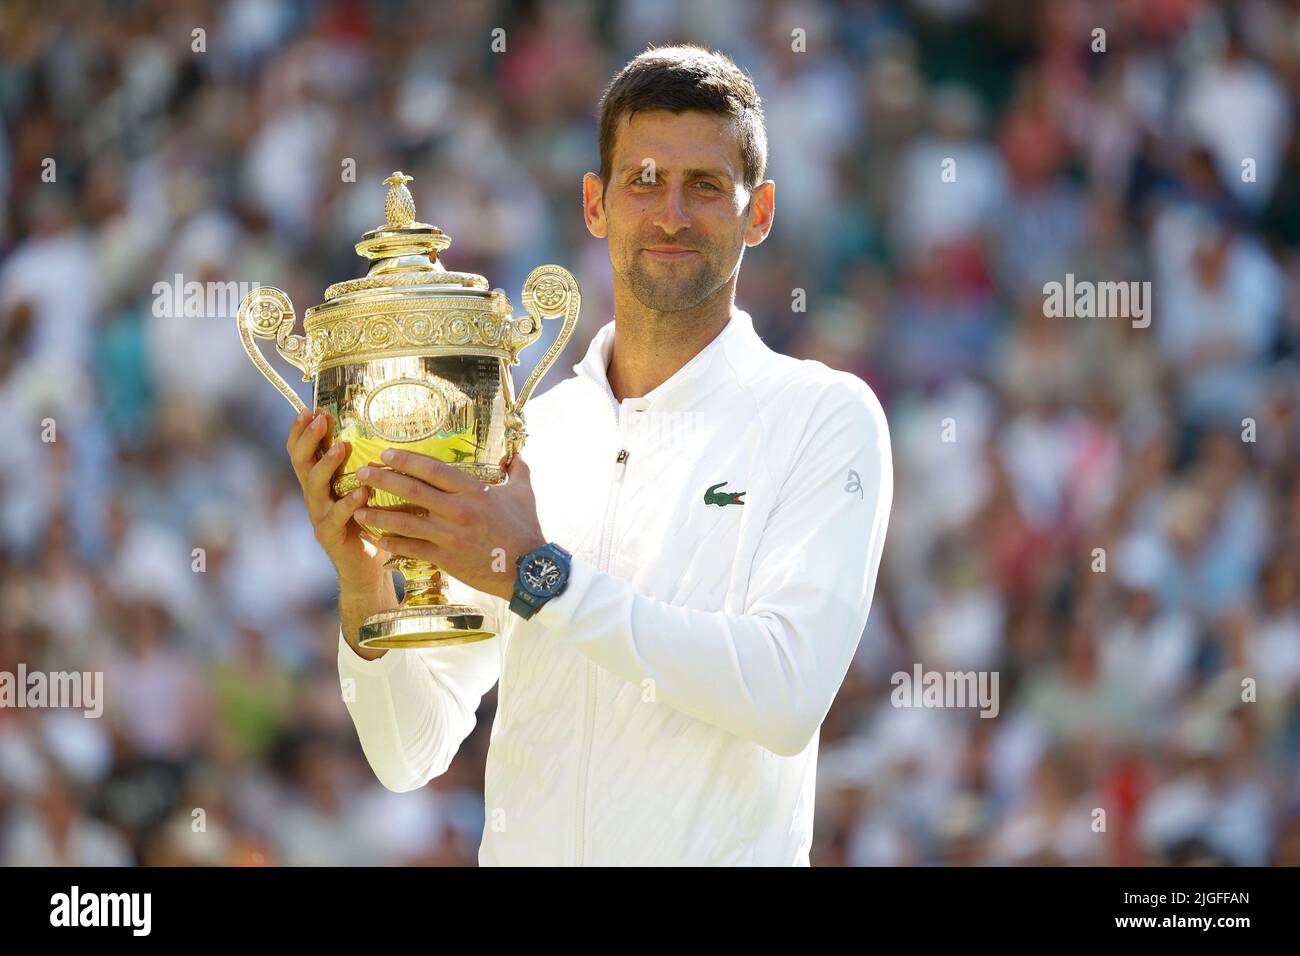 Wimbledon,Great Britain 10th. July, 2022. Champion Novak Djokovic with the trophy during the presentation at the Wimbledon 2022  Championships on Sunday 10 July 2022.,  © Juergen Hasenkopf / Alamy Live News Stock Photo